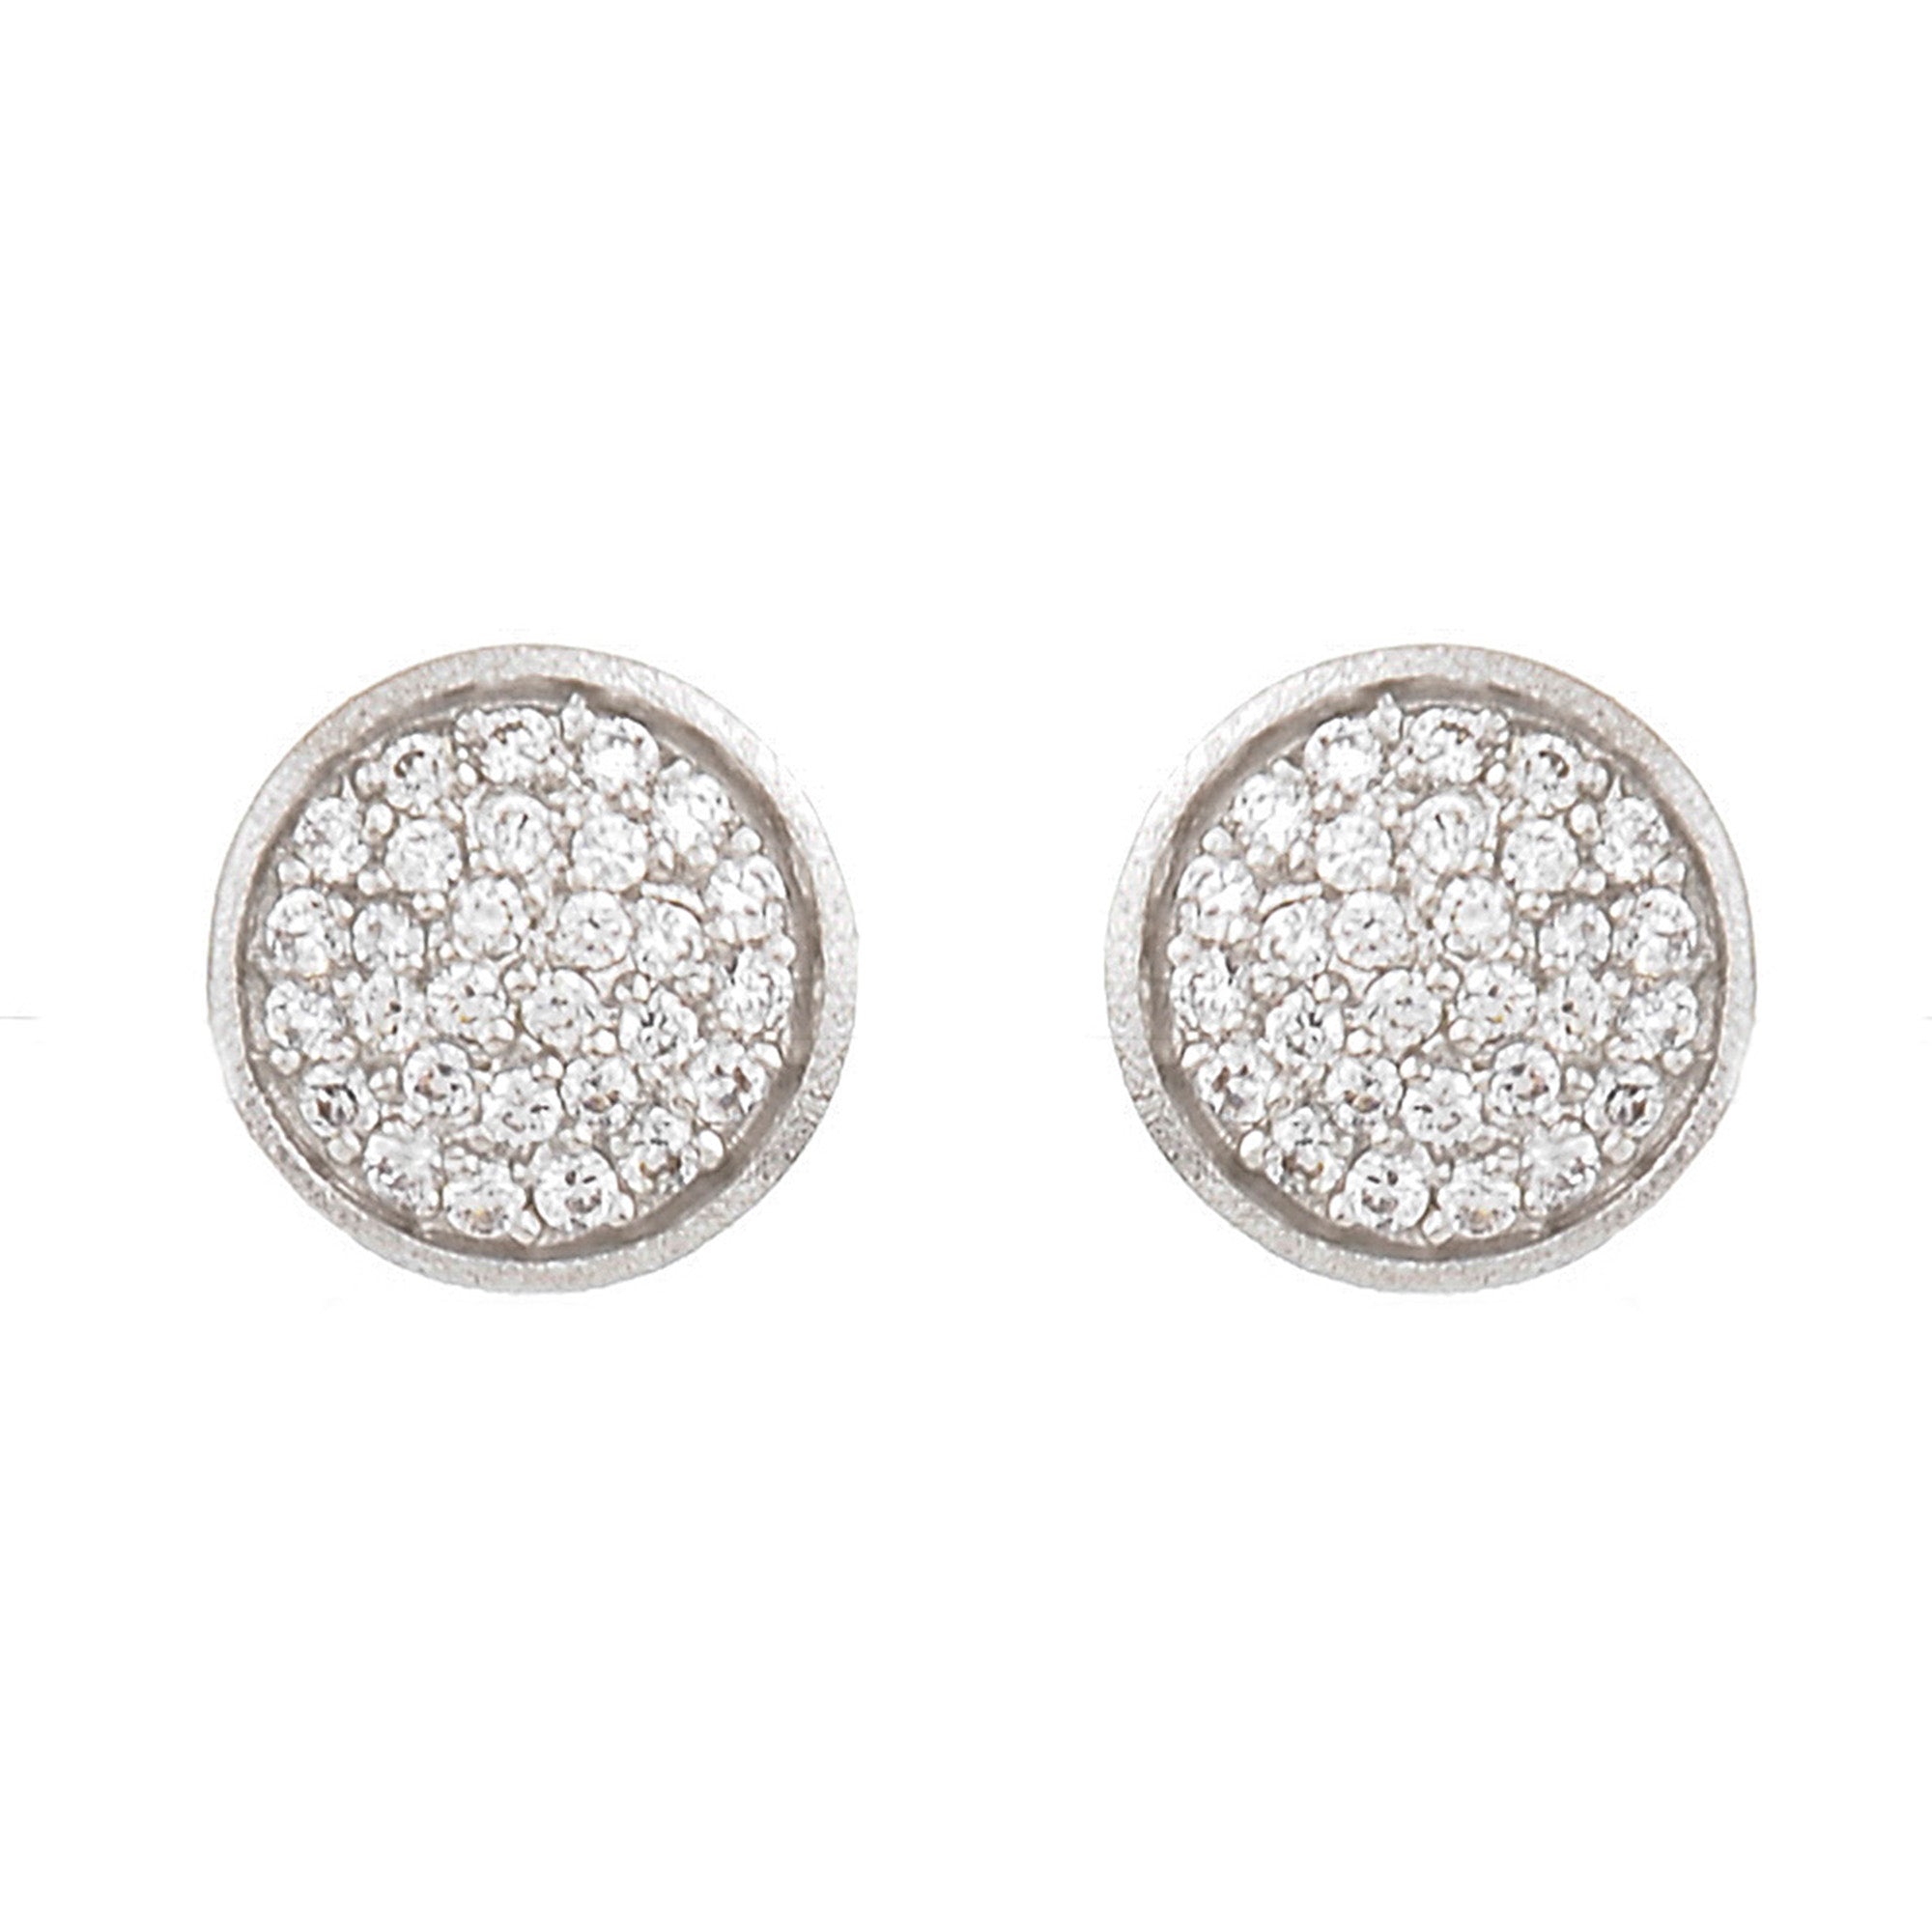 Cubic Zirconia Pave Rhodium Stud Earrings - Closeout